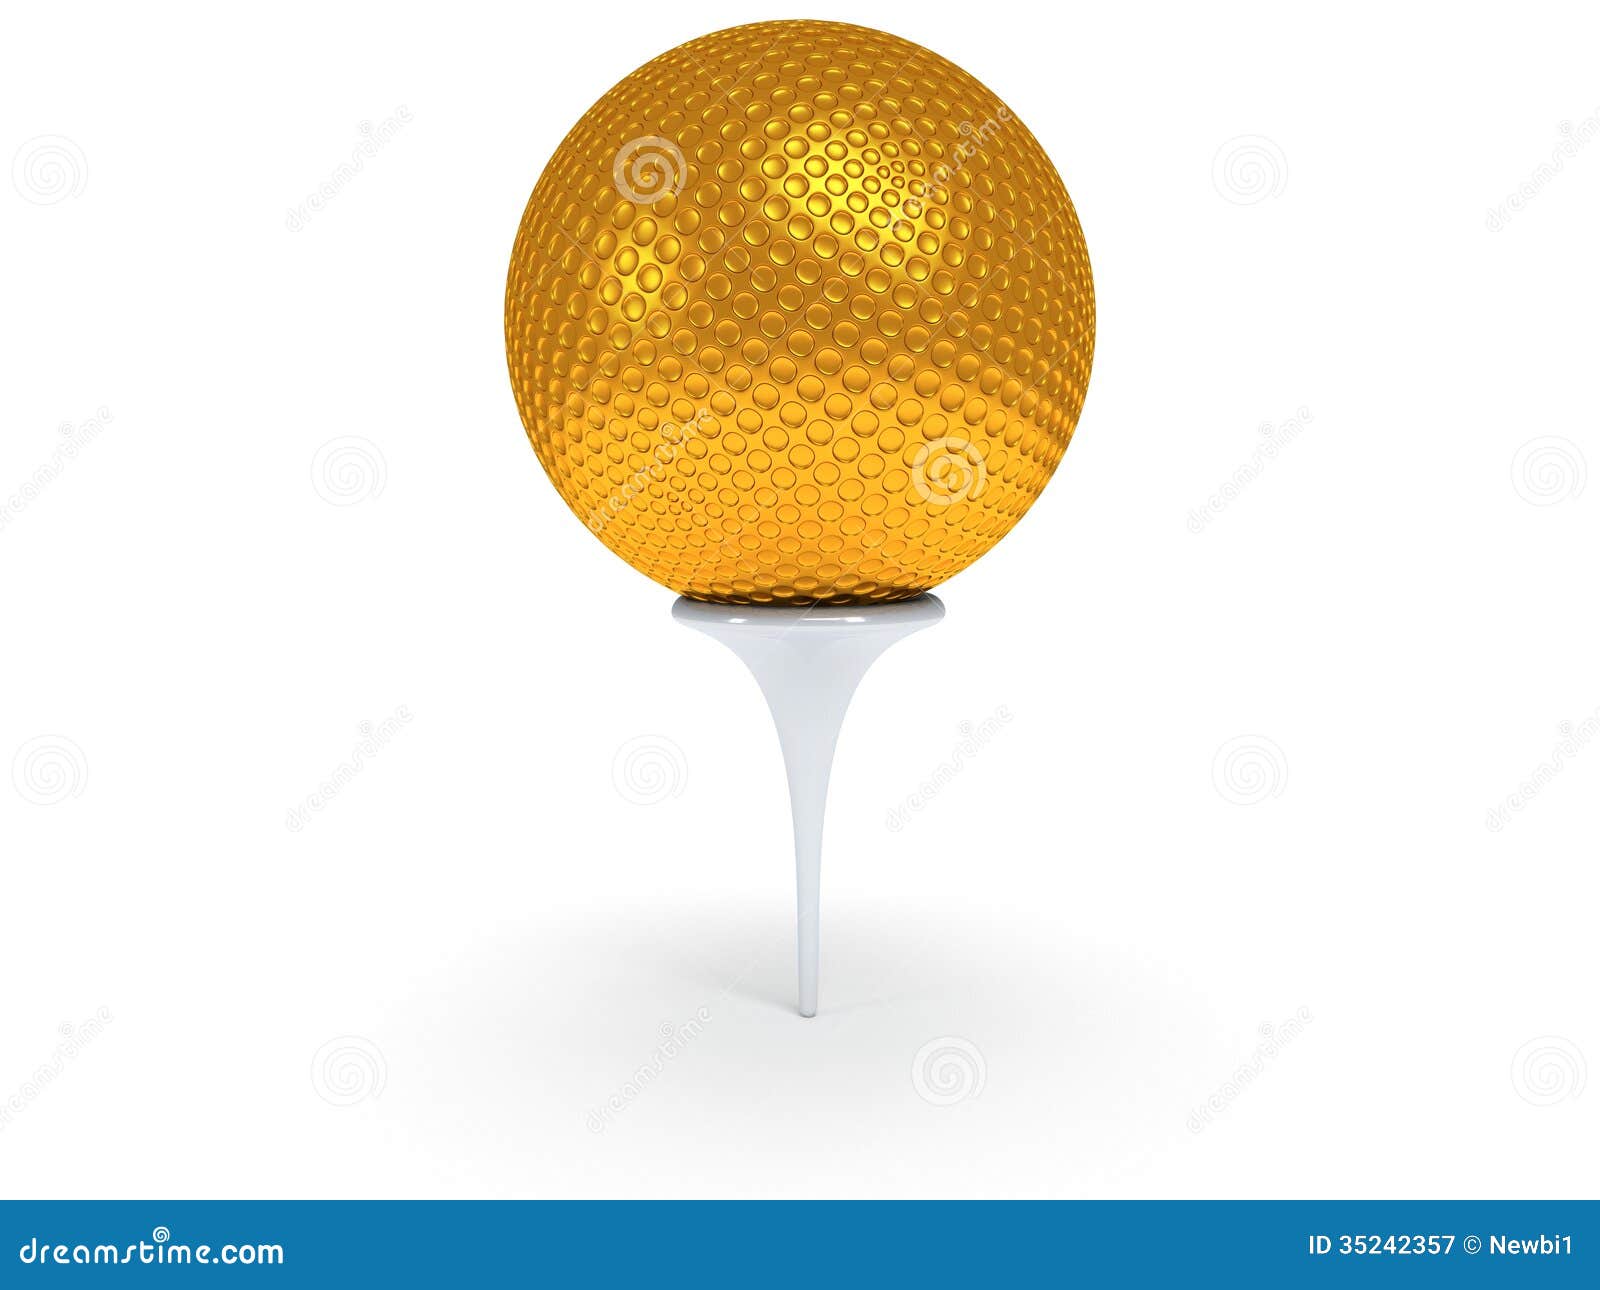 Gold Golf Ball 2021 New Year Santa Hat On A White Background 3D ...